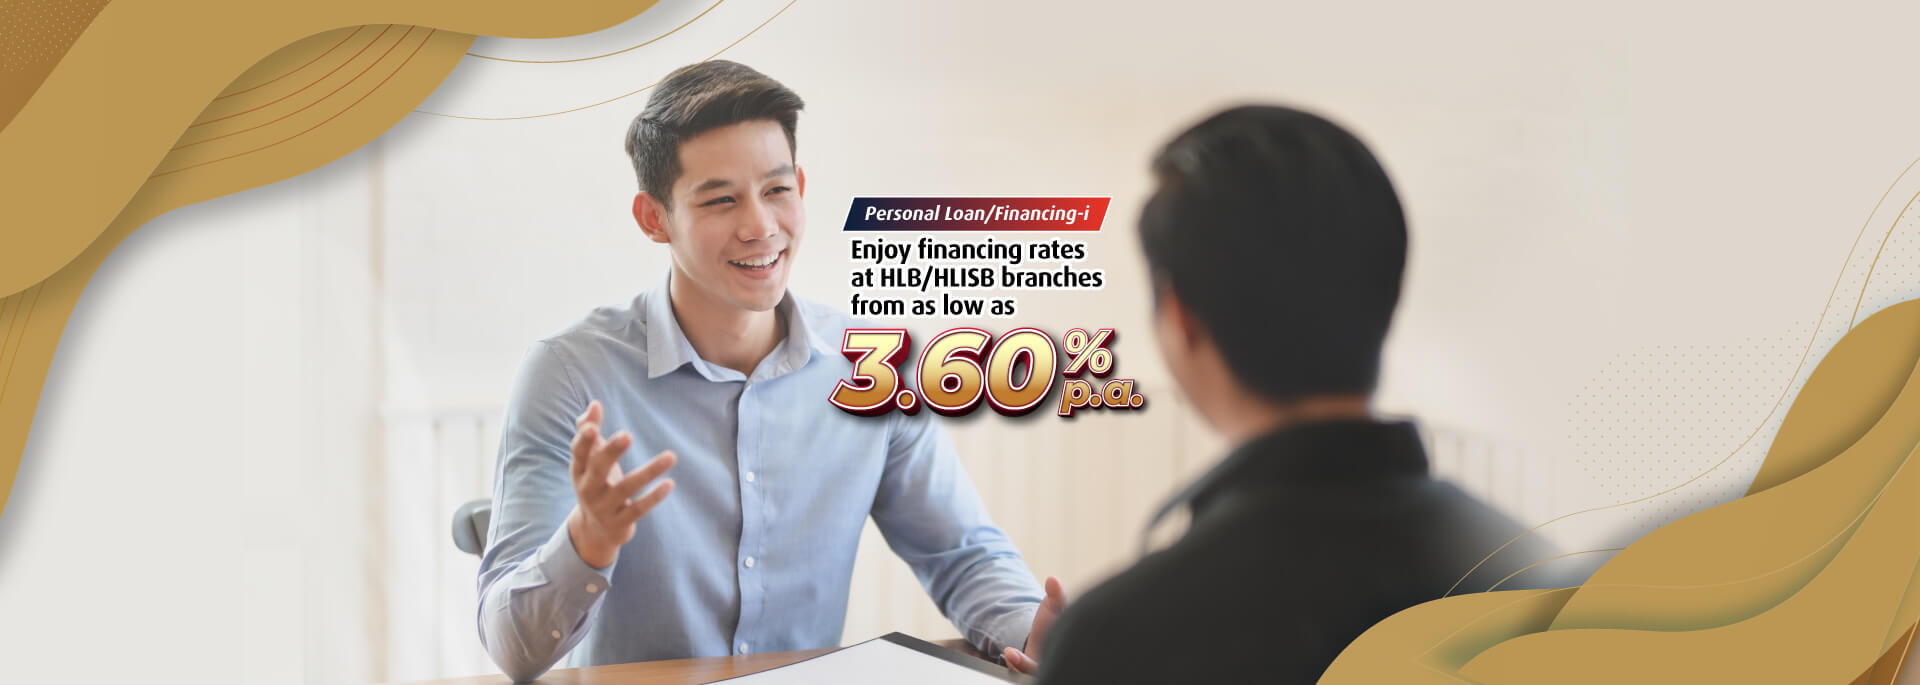 Enjoy financing rates from 3.60% p.a. at our Branches*